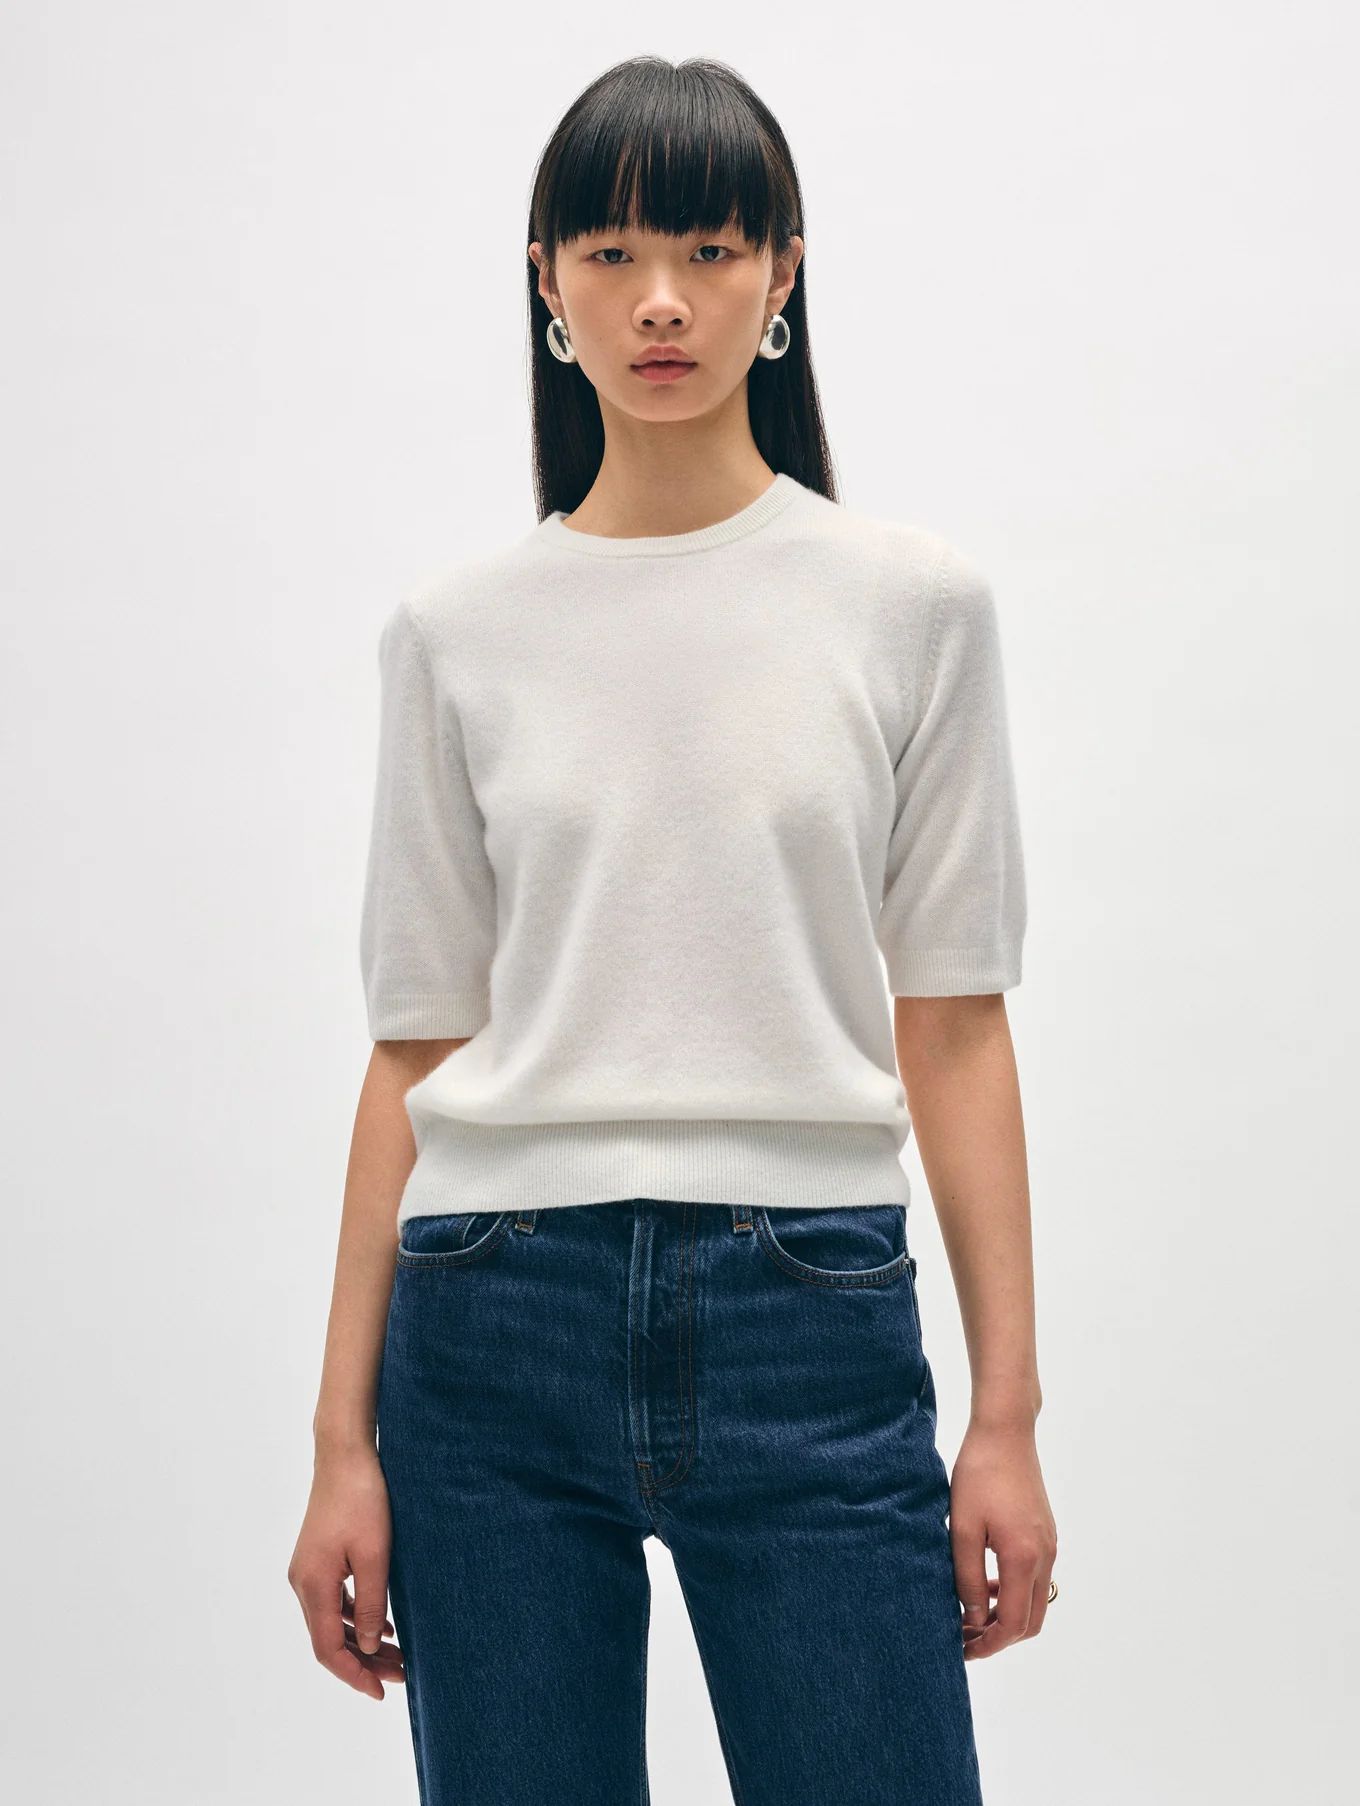 Essential Cashmere Tee | White and Warren